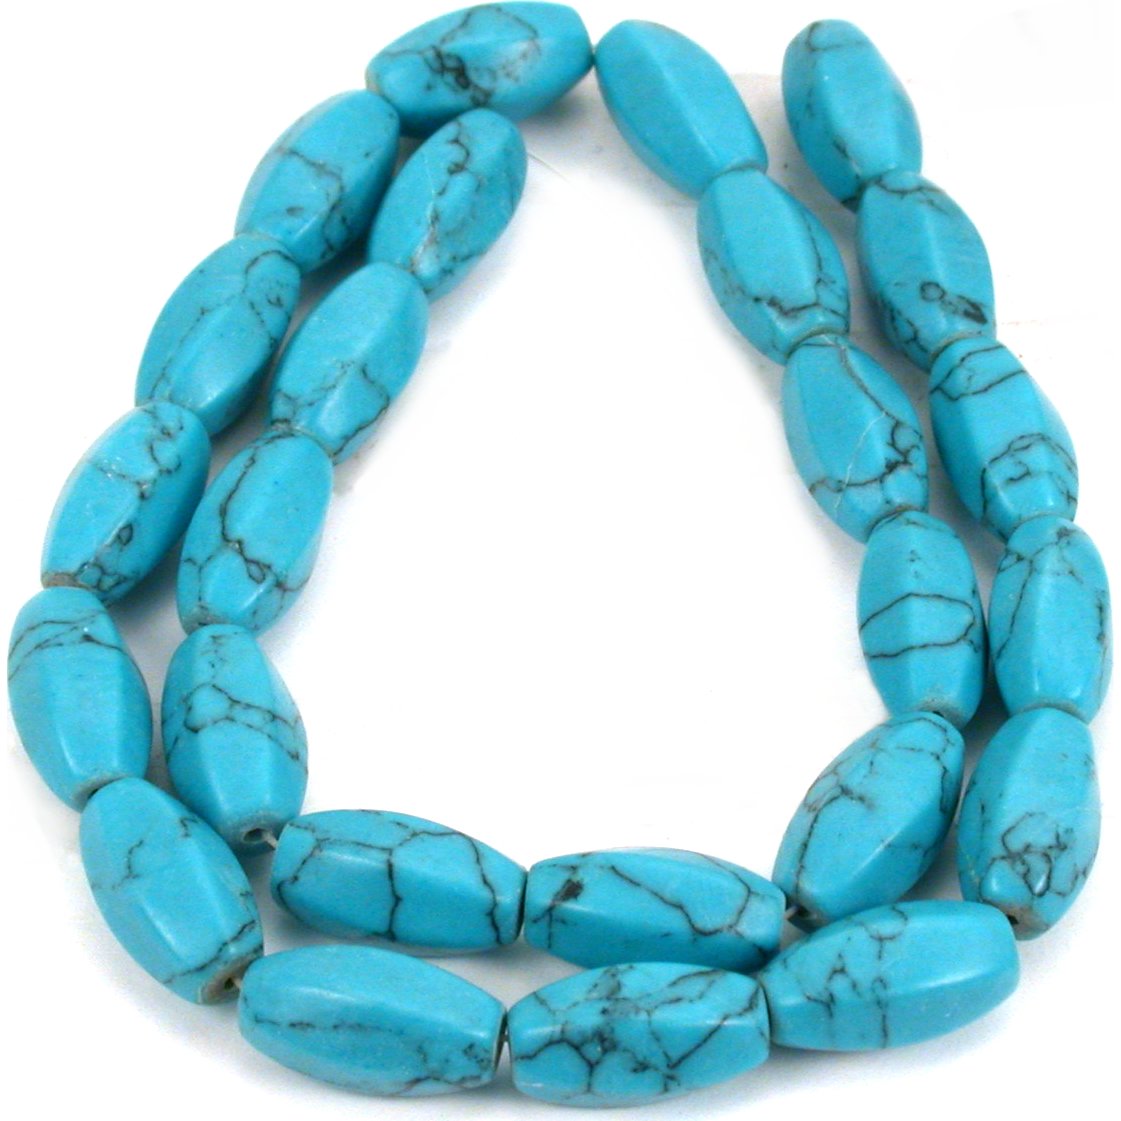 Turquoise Matrix Synthetic Rice Faceted Beads 16mm 1 Strand